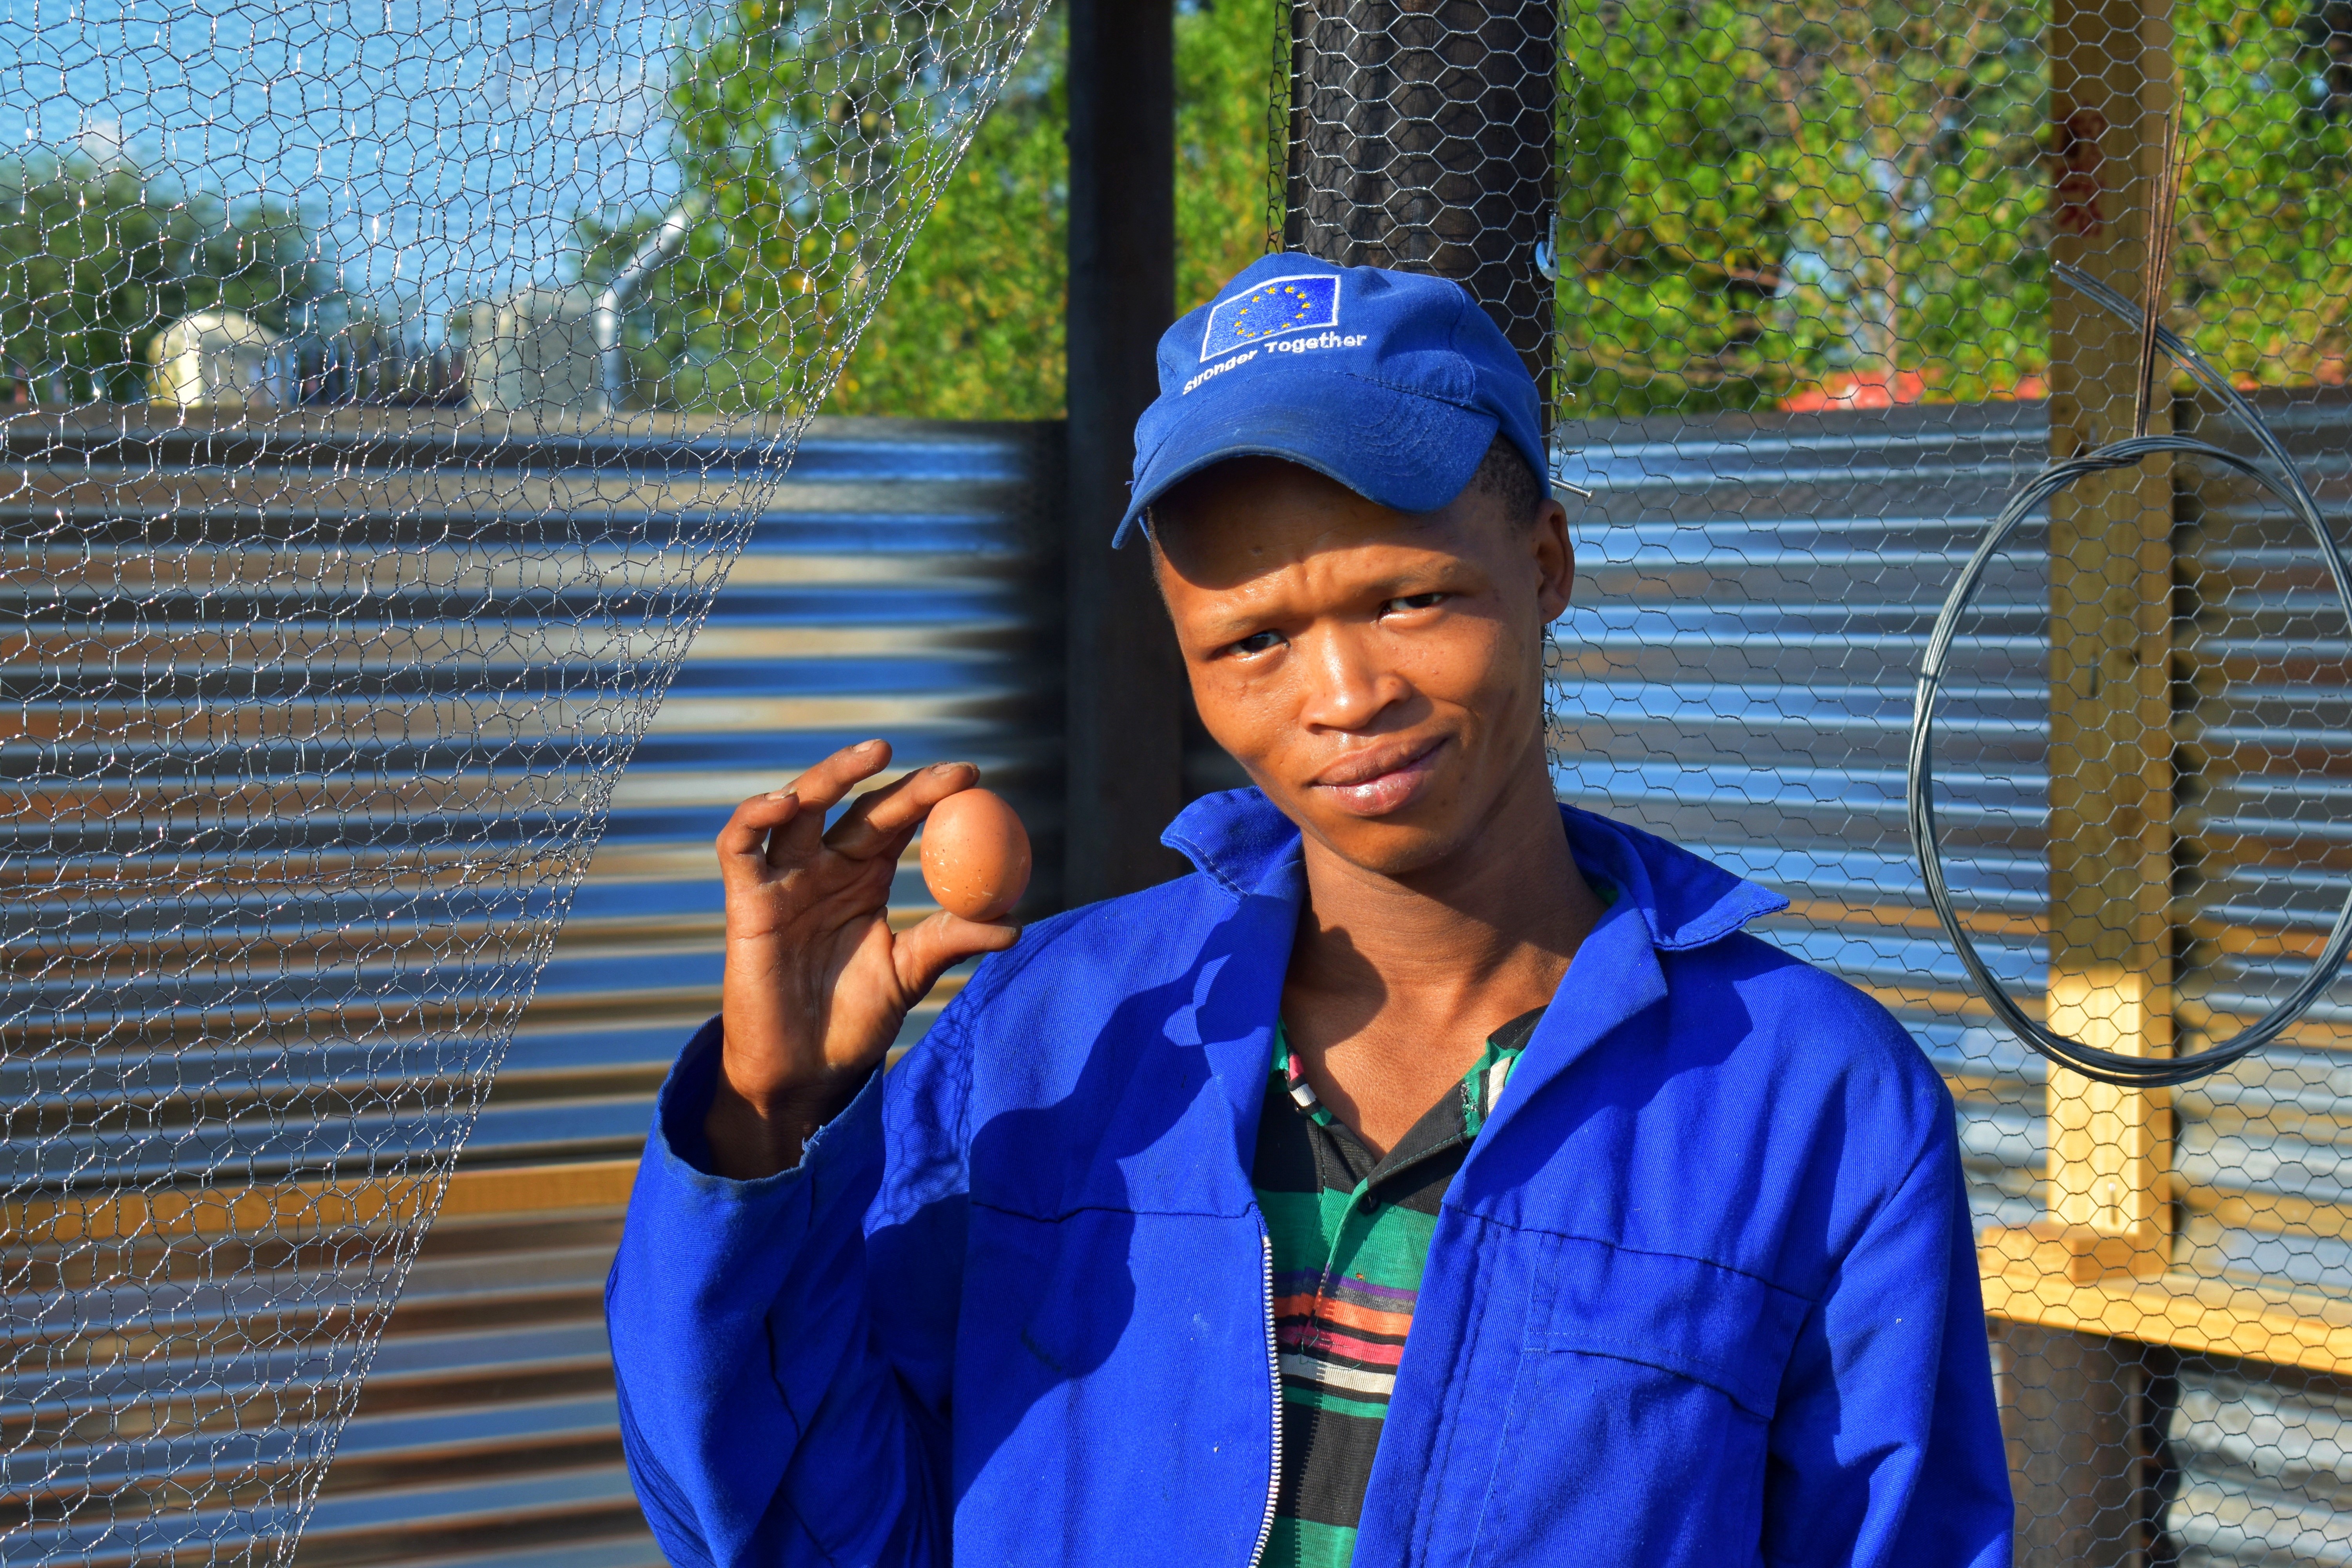 G!ao _Kunta, one of the youth trainees from Tsumkwe, holds an egg he found in the poultry structure